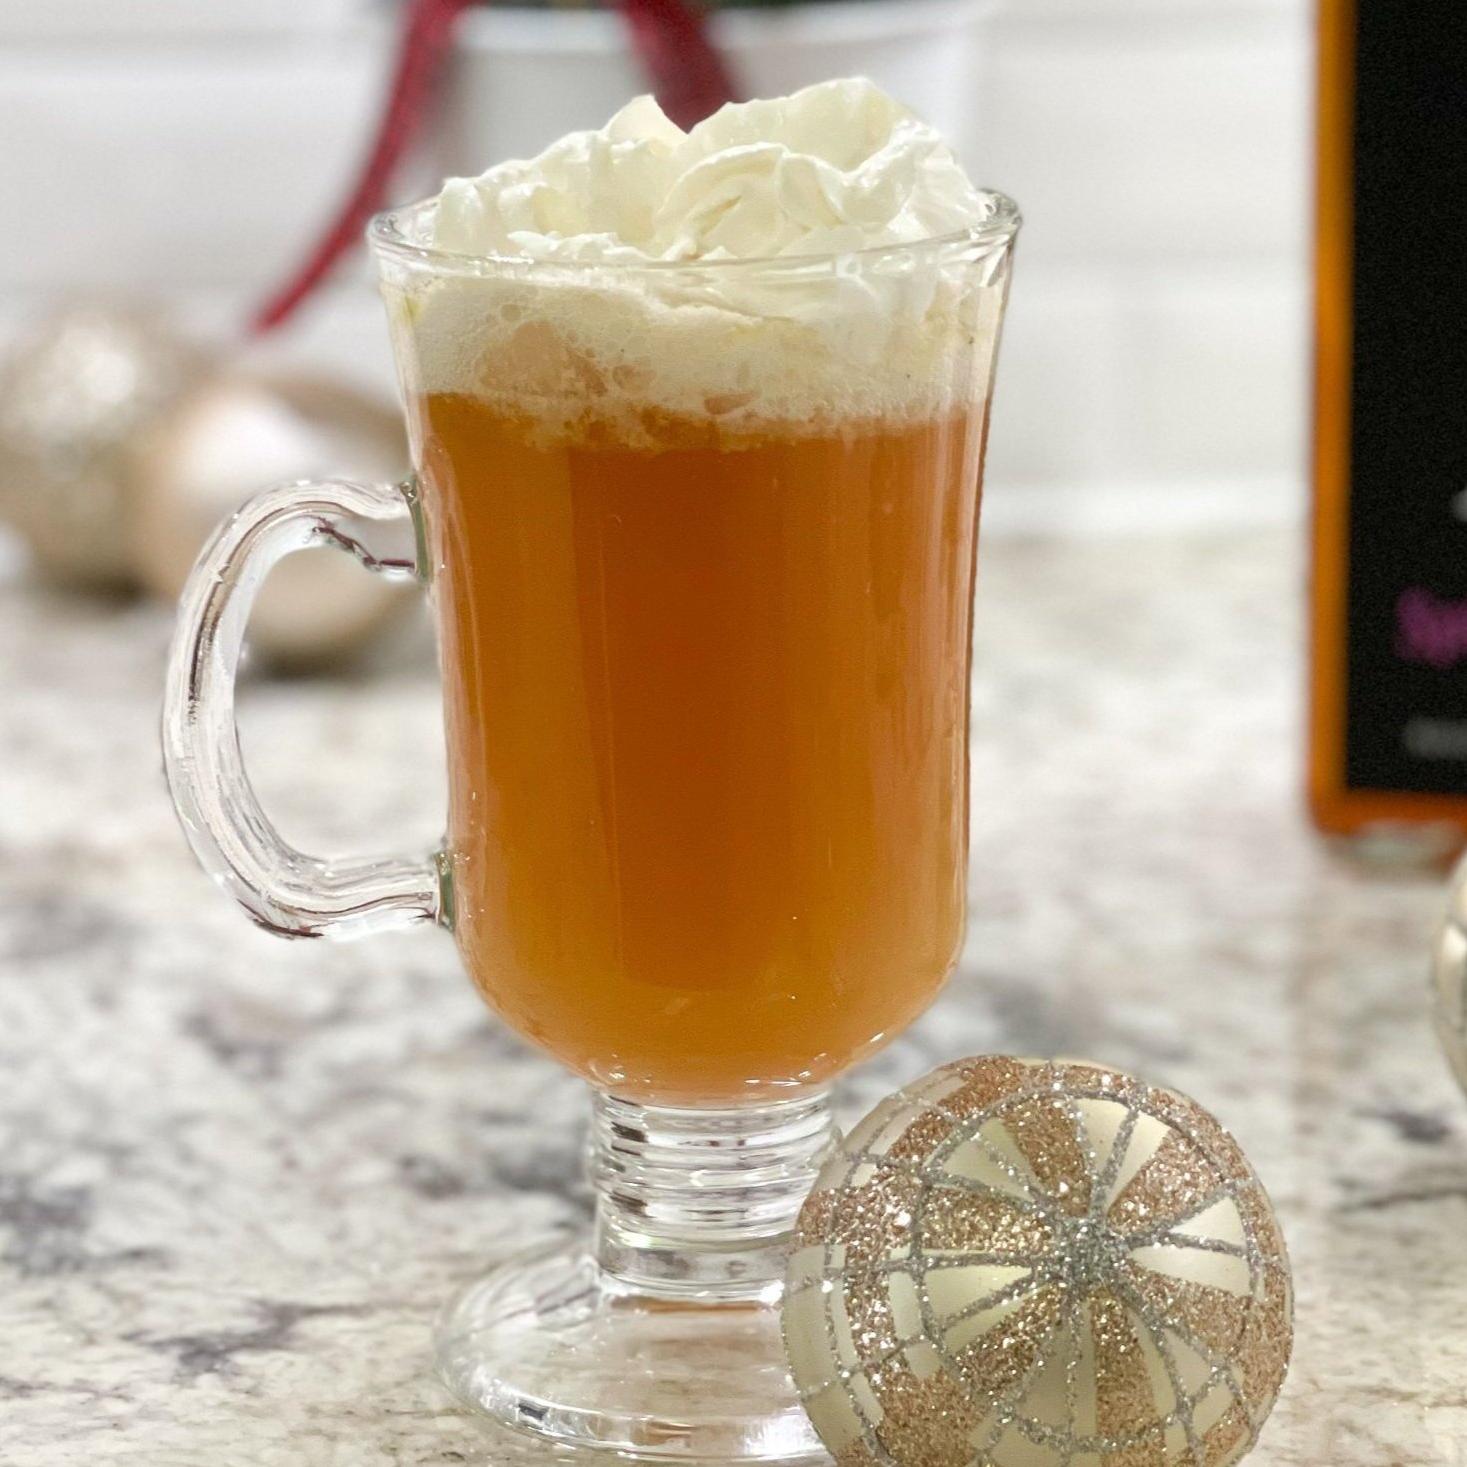  Give your taste buds a treat with the rich and creamy flavors of Hot Buttered Rum Coffee.